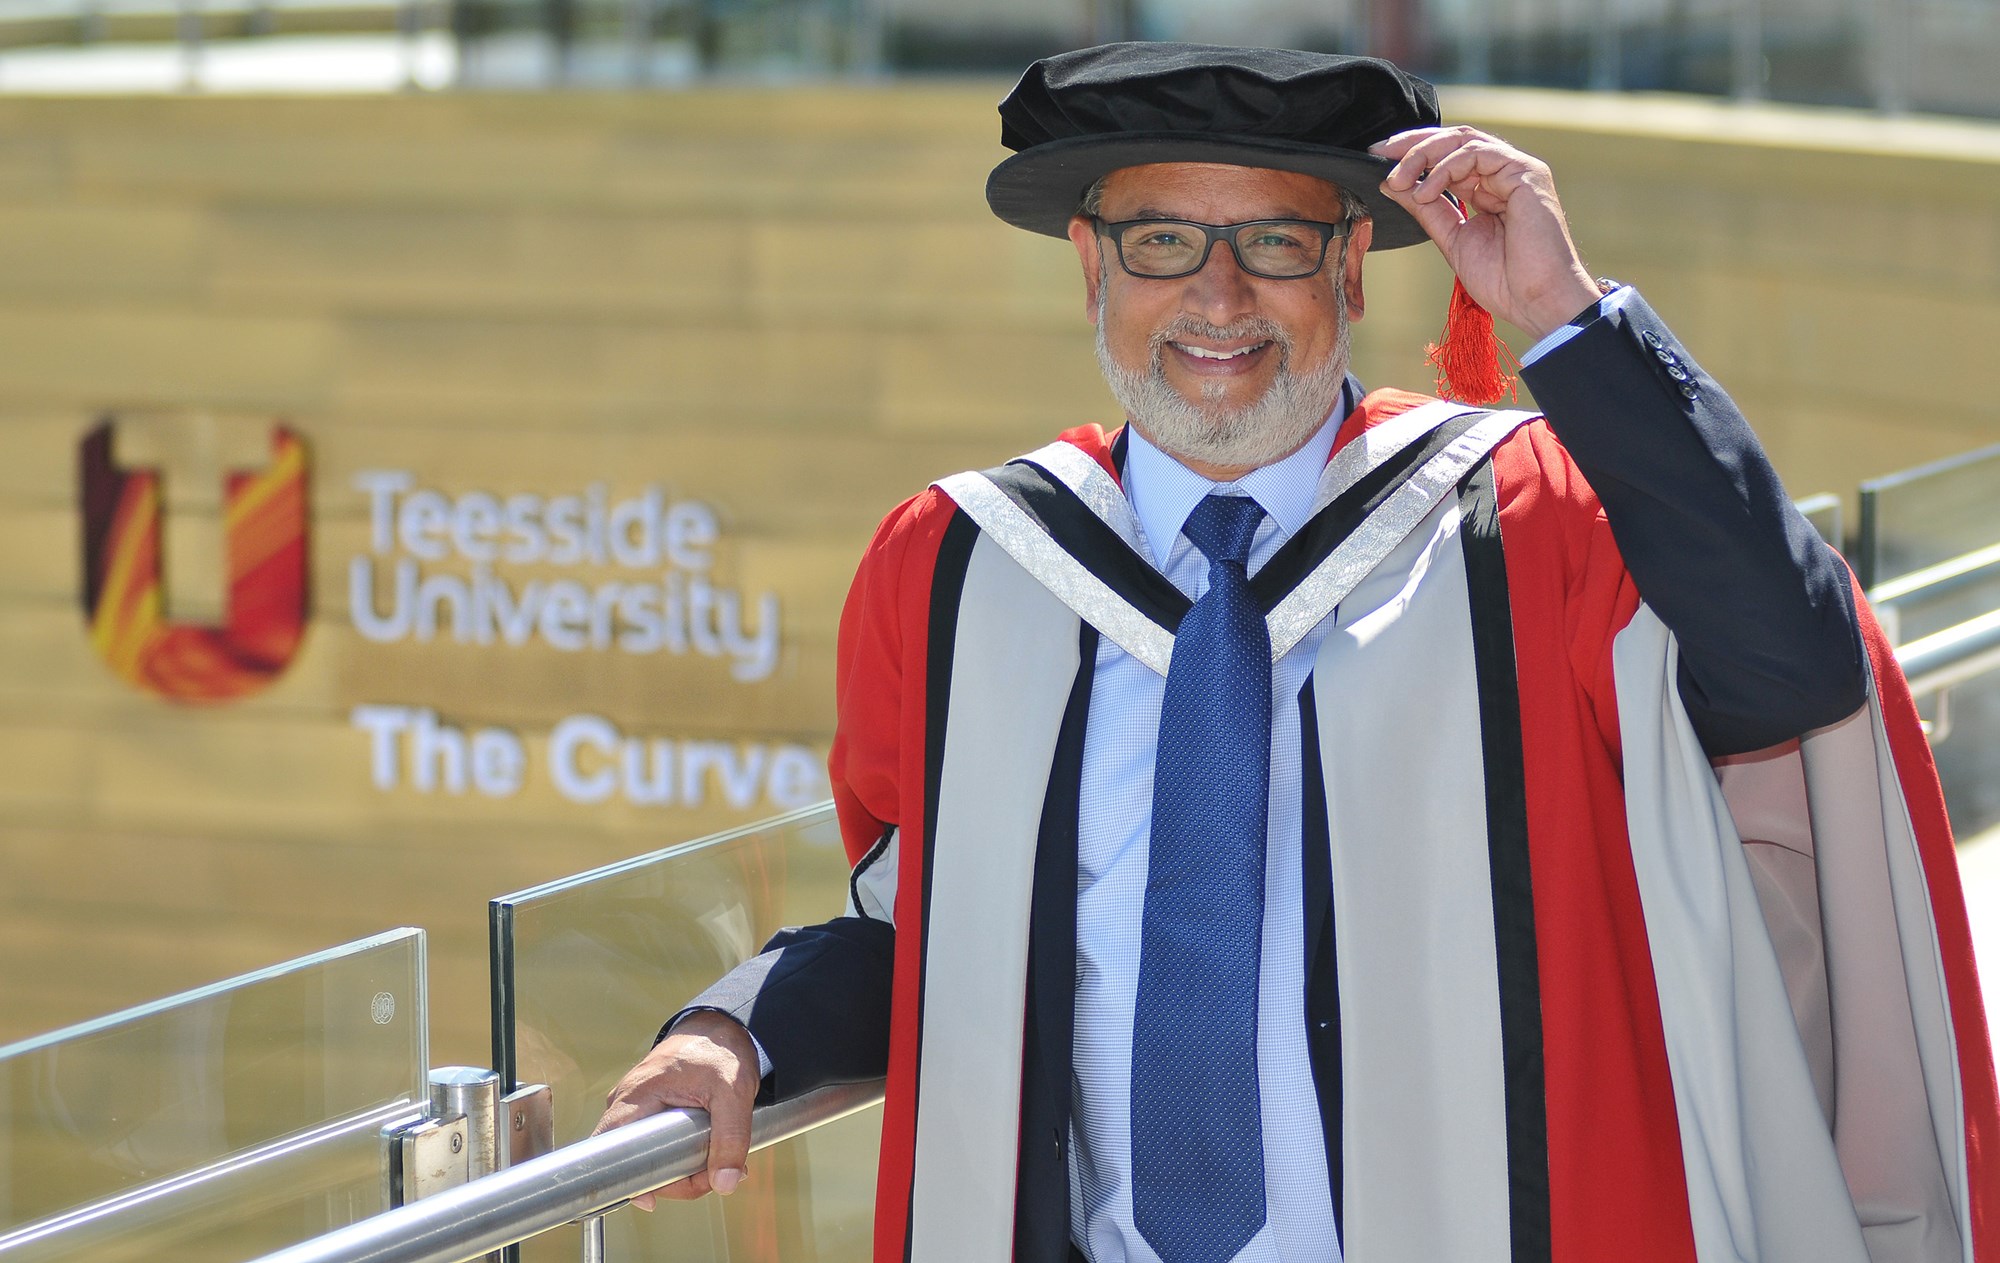 Nas Khan receives his honorary doctorate at Teesside University